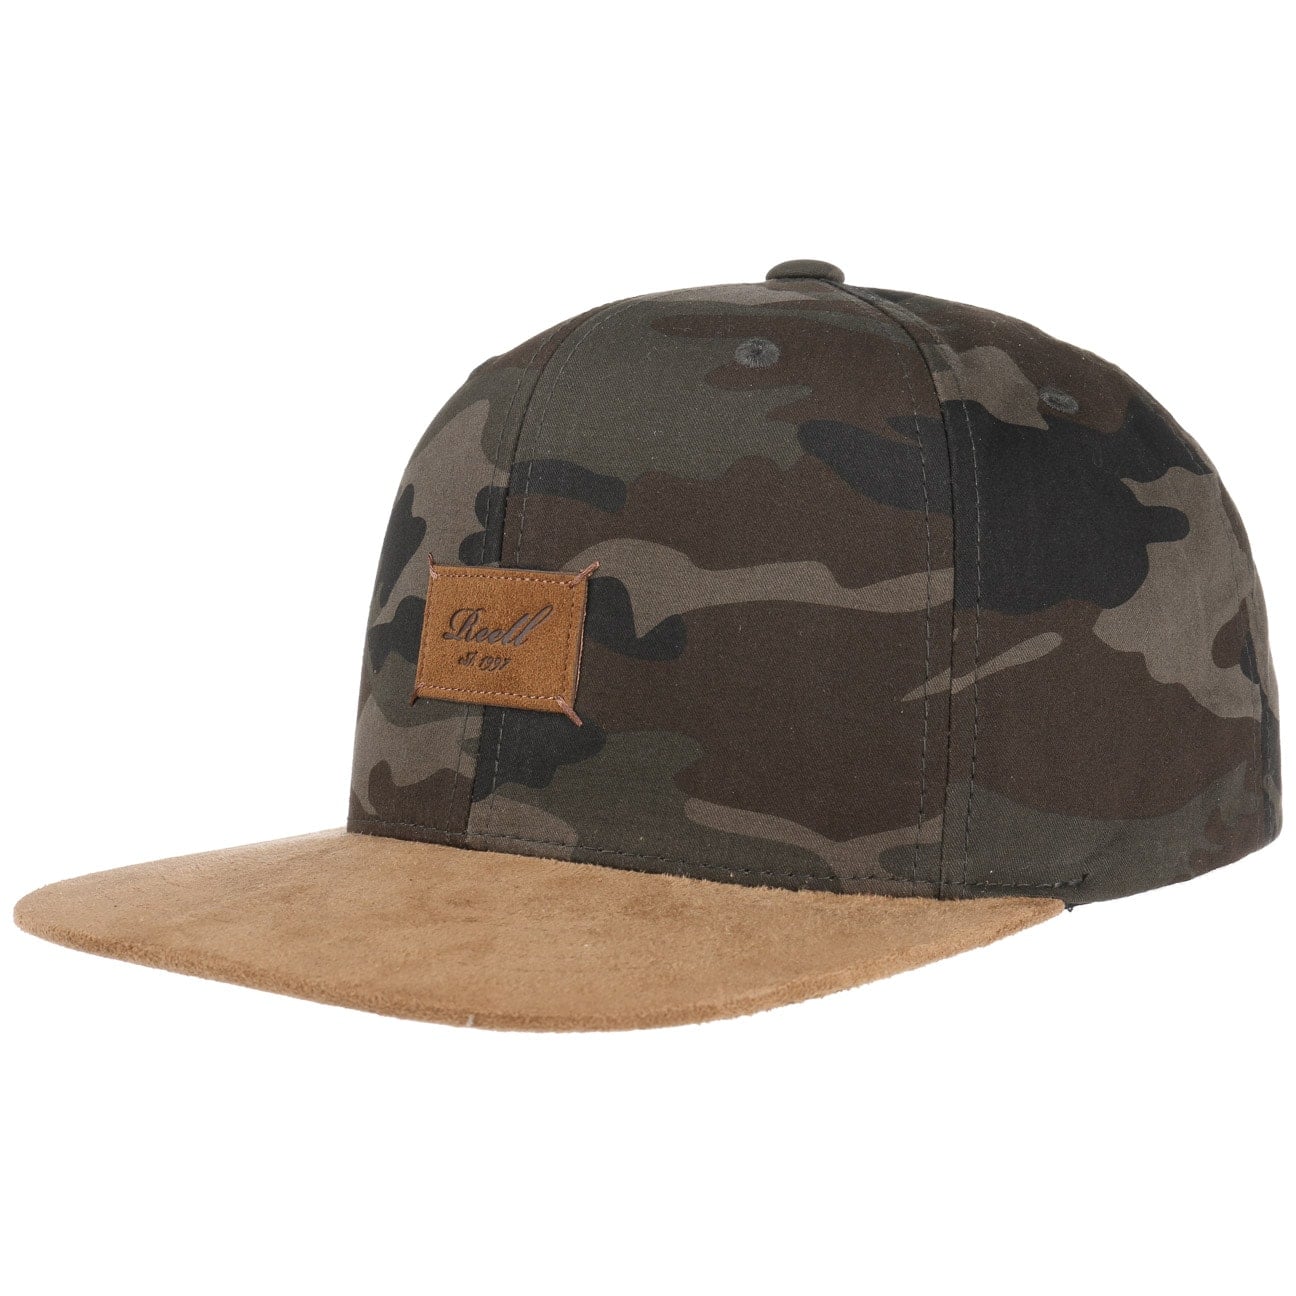 Suede 6 Panel Snapback Cap by Reell von Reell